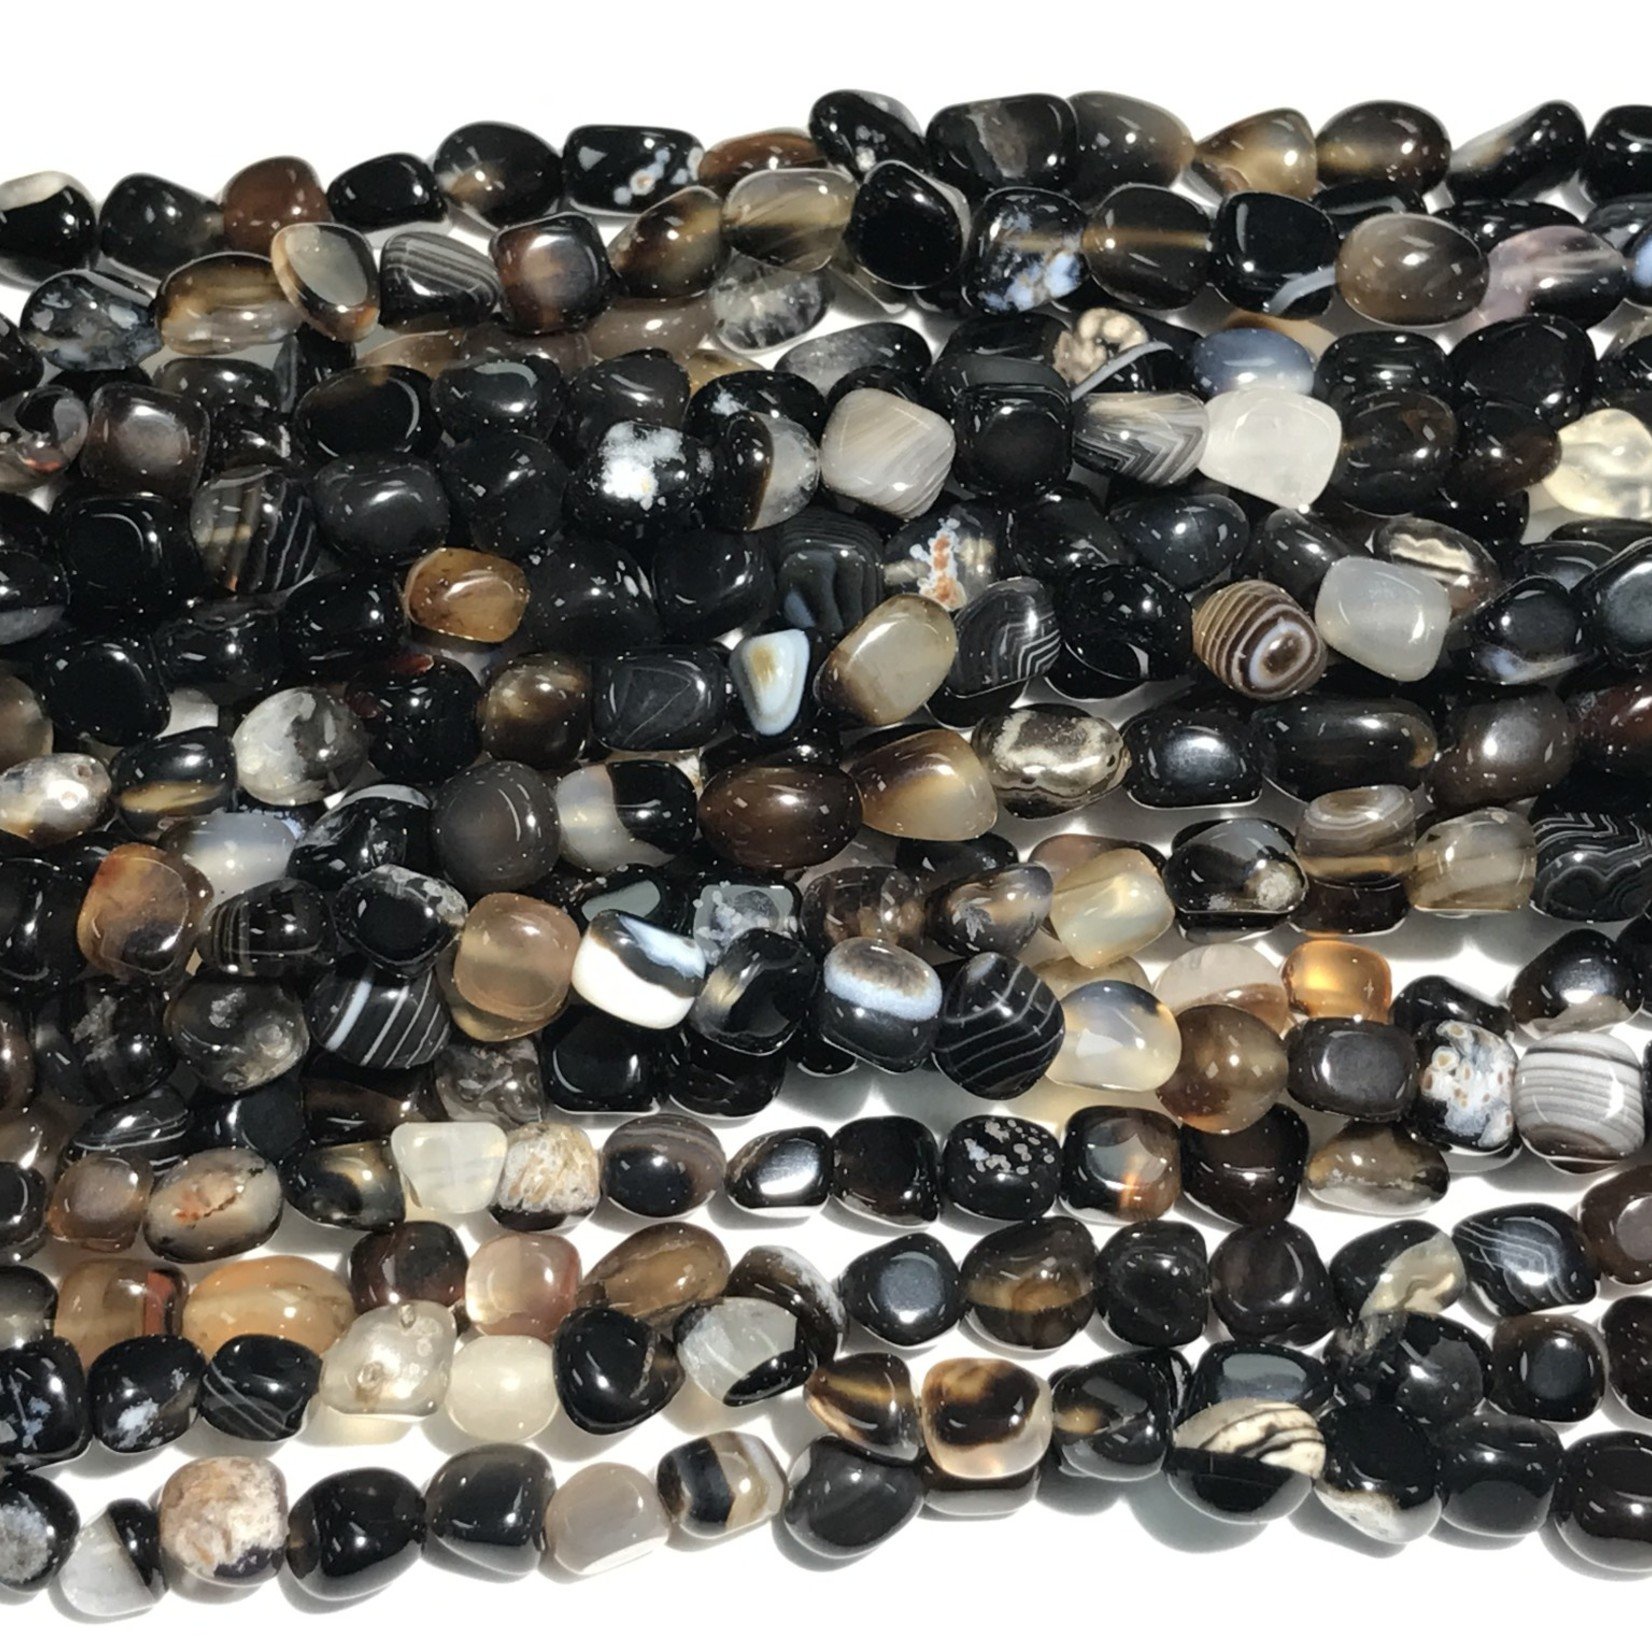 Black Agate Small Nugget Beads (Natural) 5-7mm